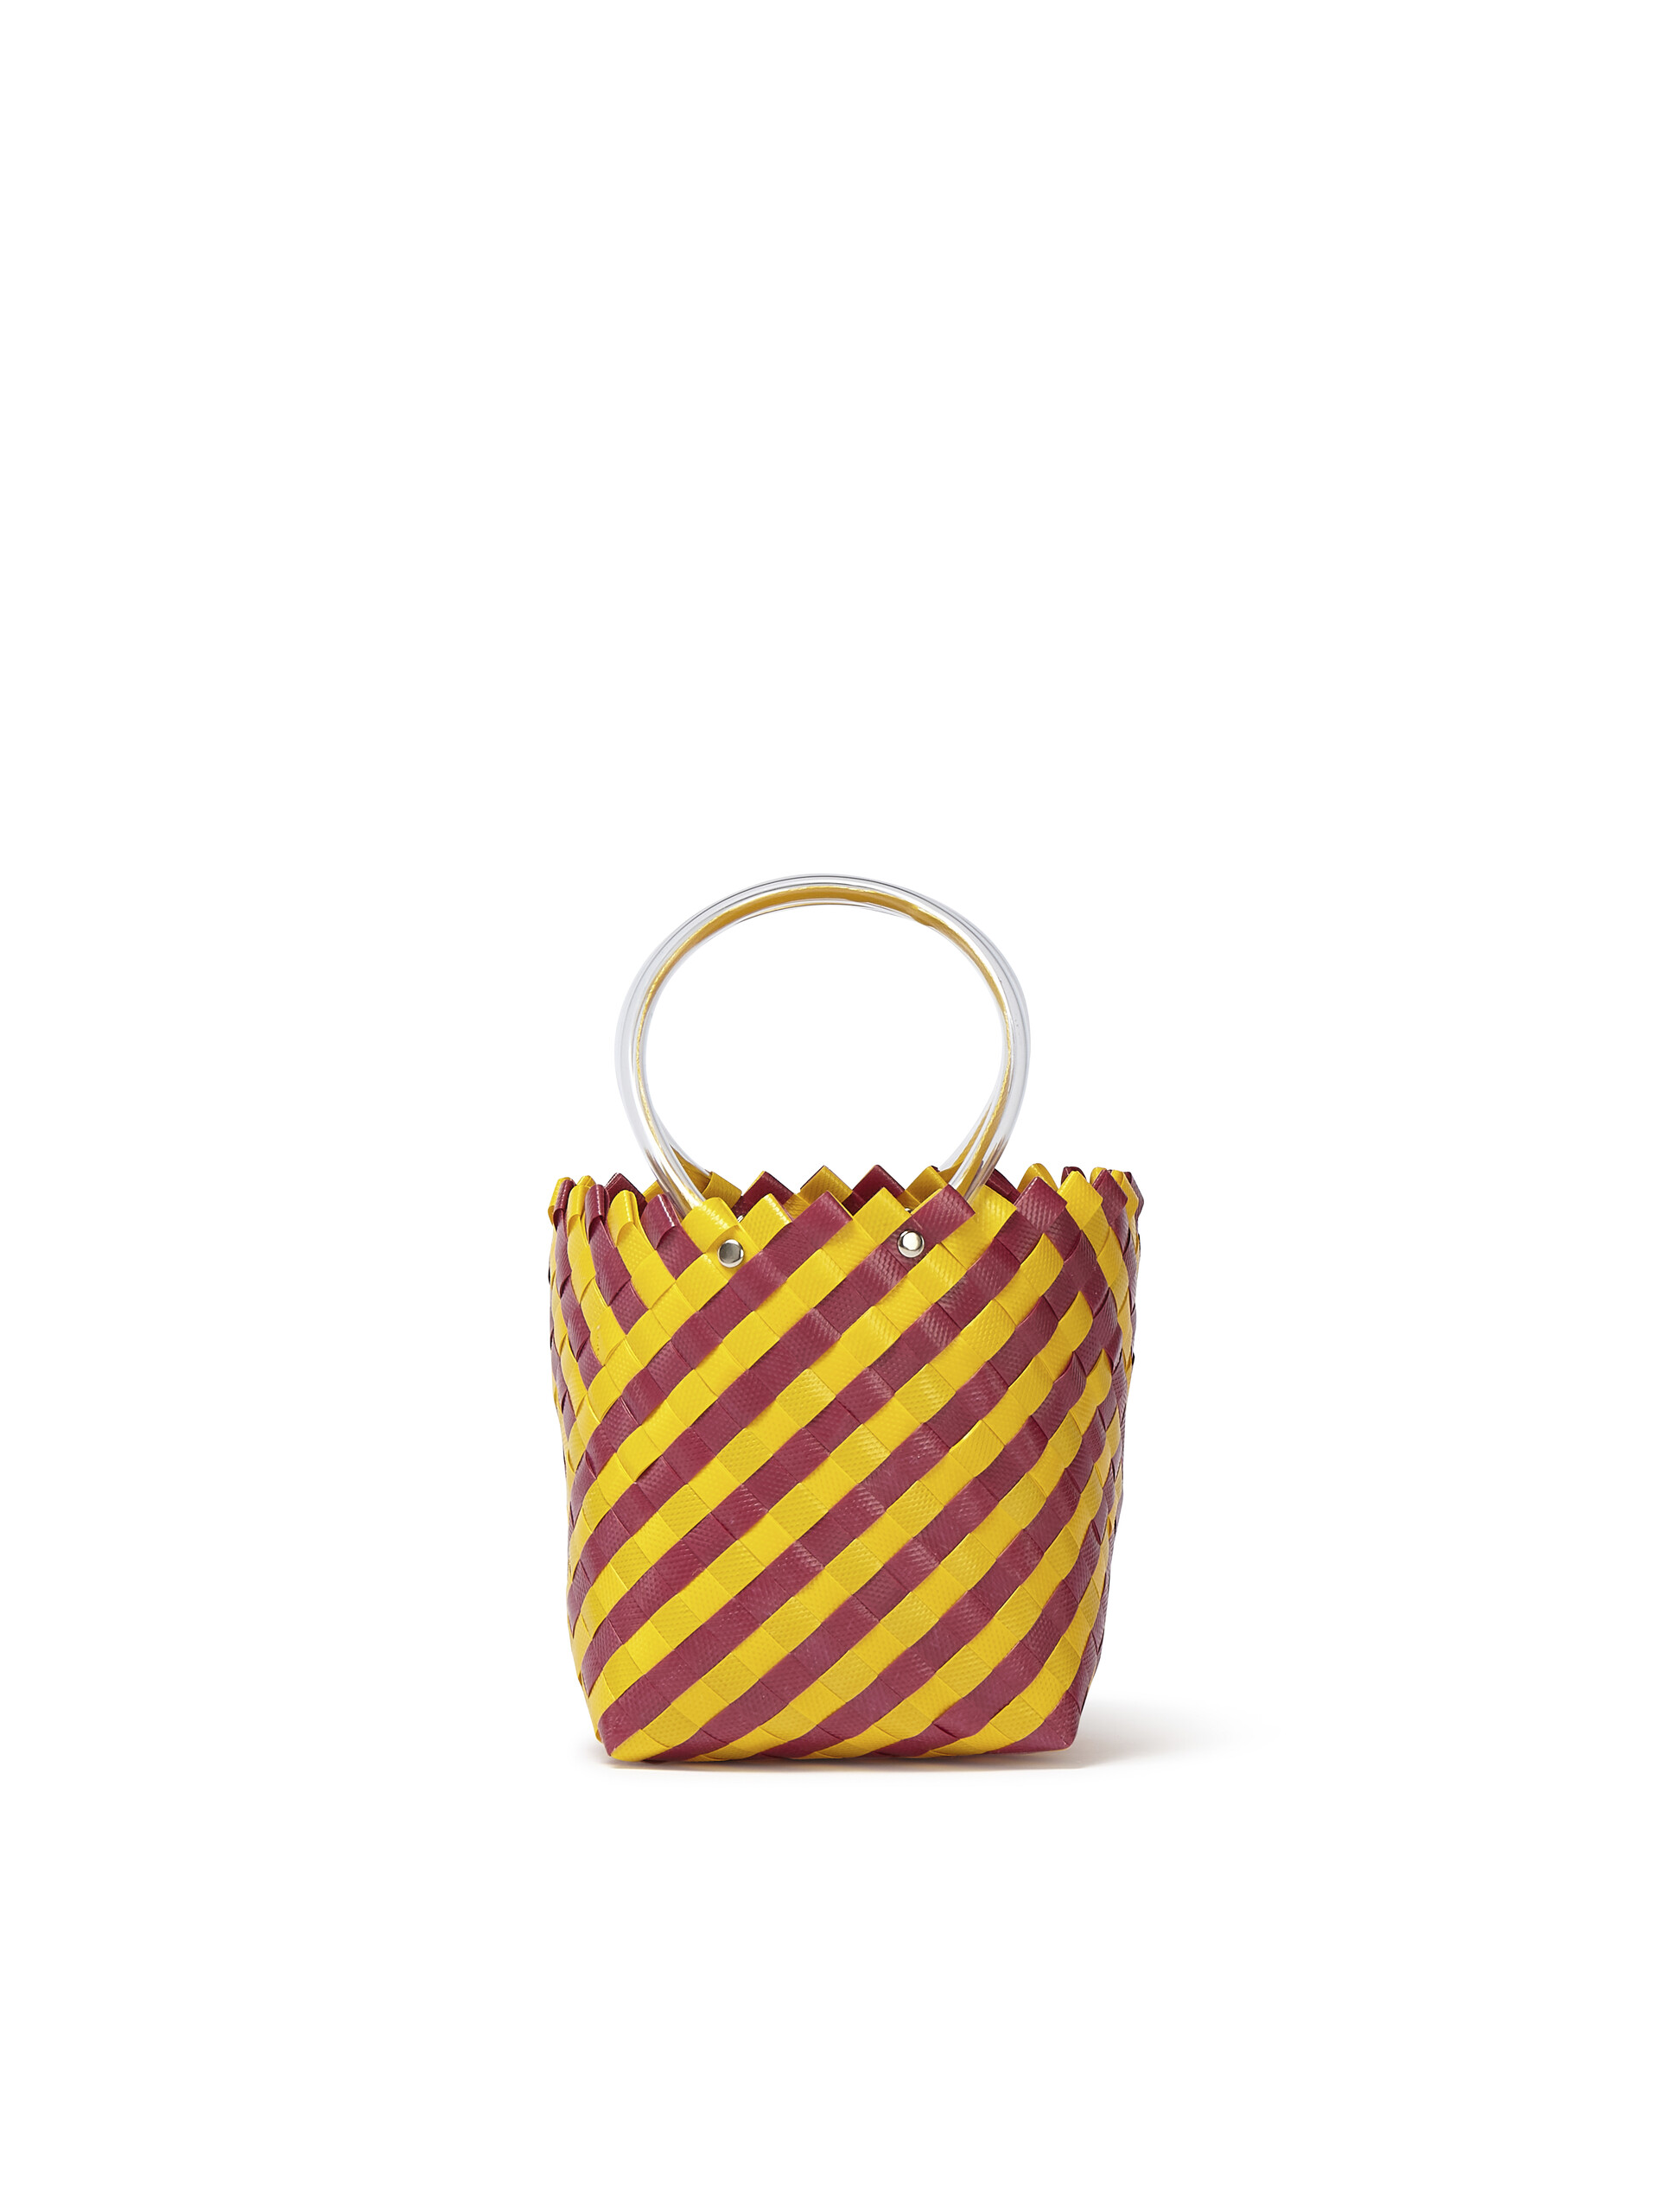 MARNI MARKET bag in yellow and burgundy woven material - Bags - Image 3